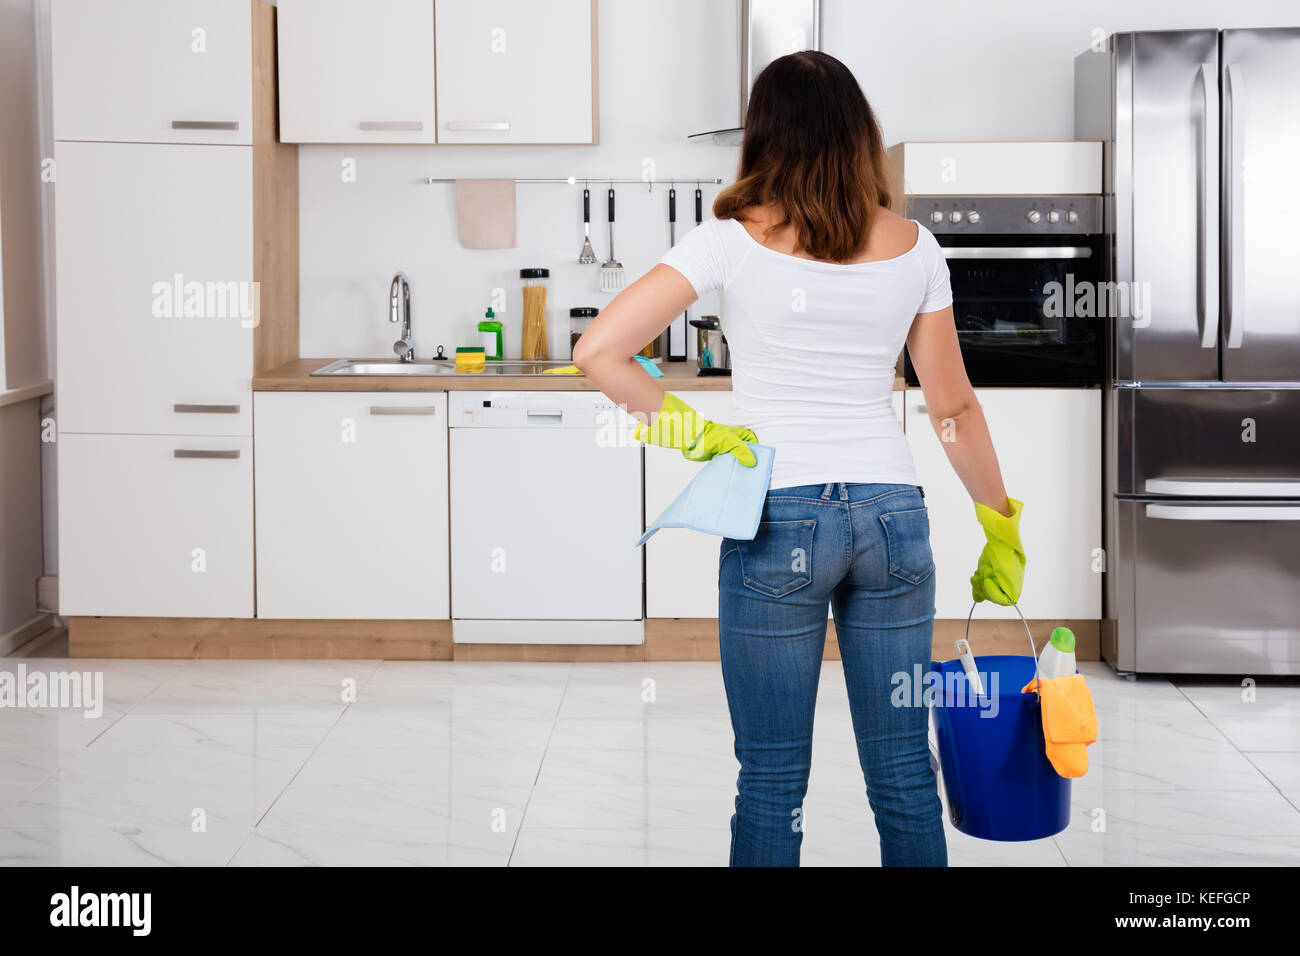 Rear View Of Woman Holding Cleaning Tools And Products In Bucket At Kitchen Stock Photo